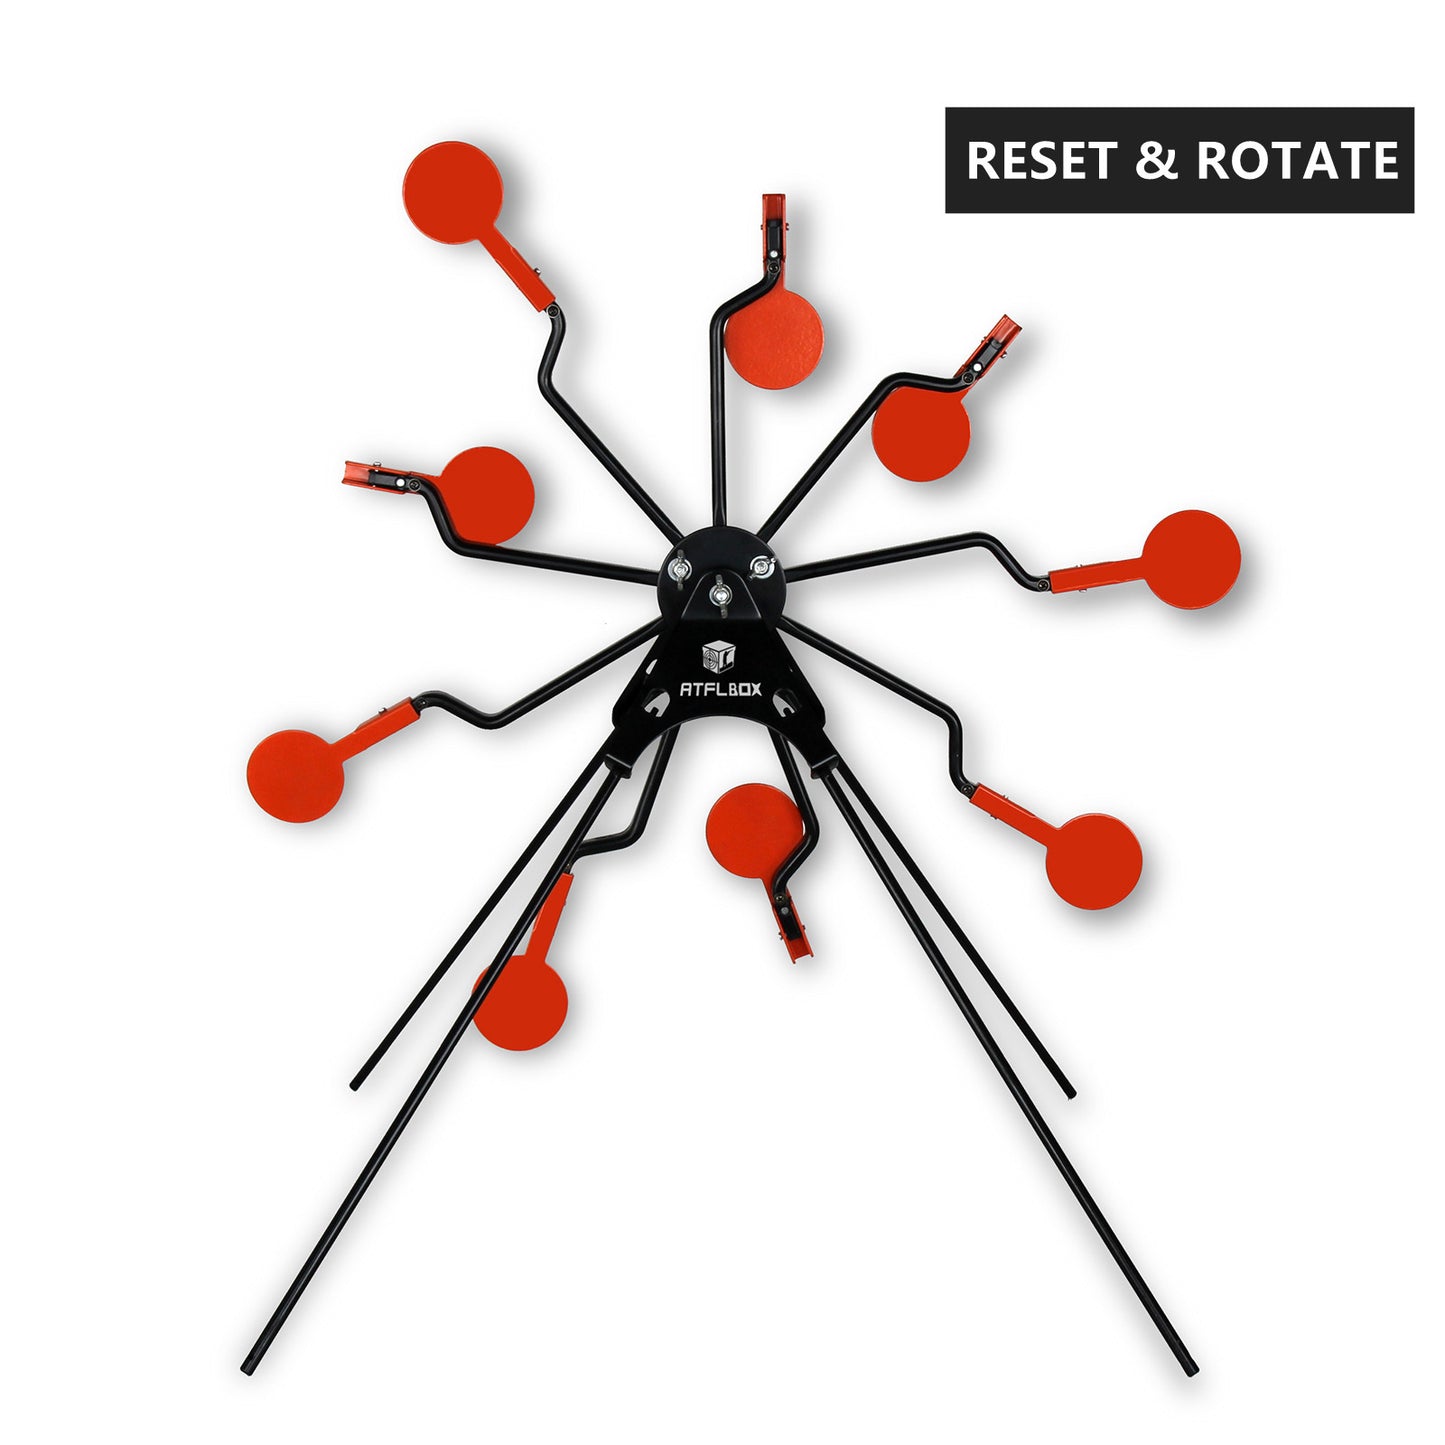 Atflbox Ferris Wheel Metal Resetting Mobile Shooting Targets for Backyard, Outdoor, Suitable for Airsoft, Rifle, Airgun